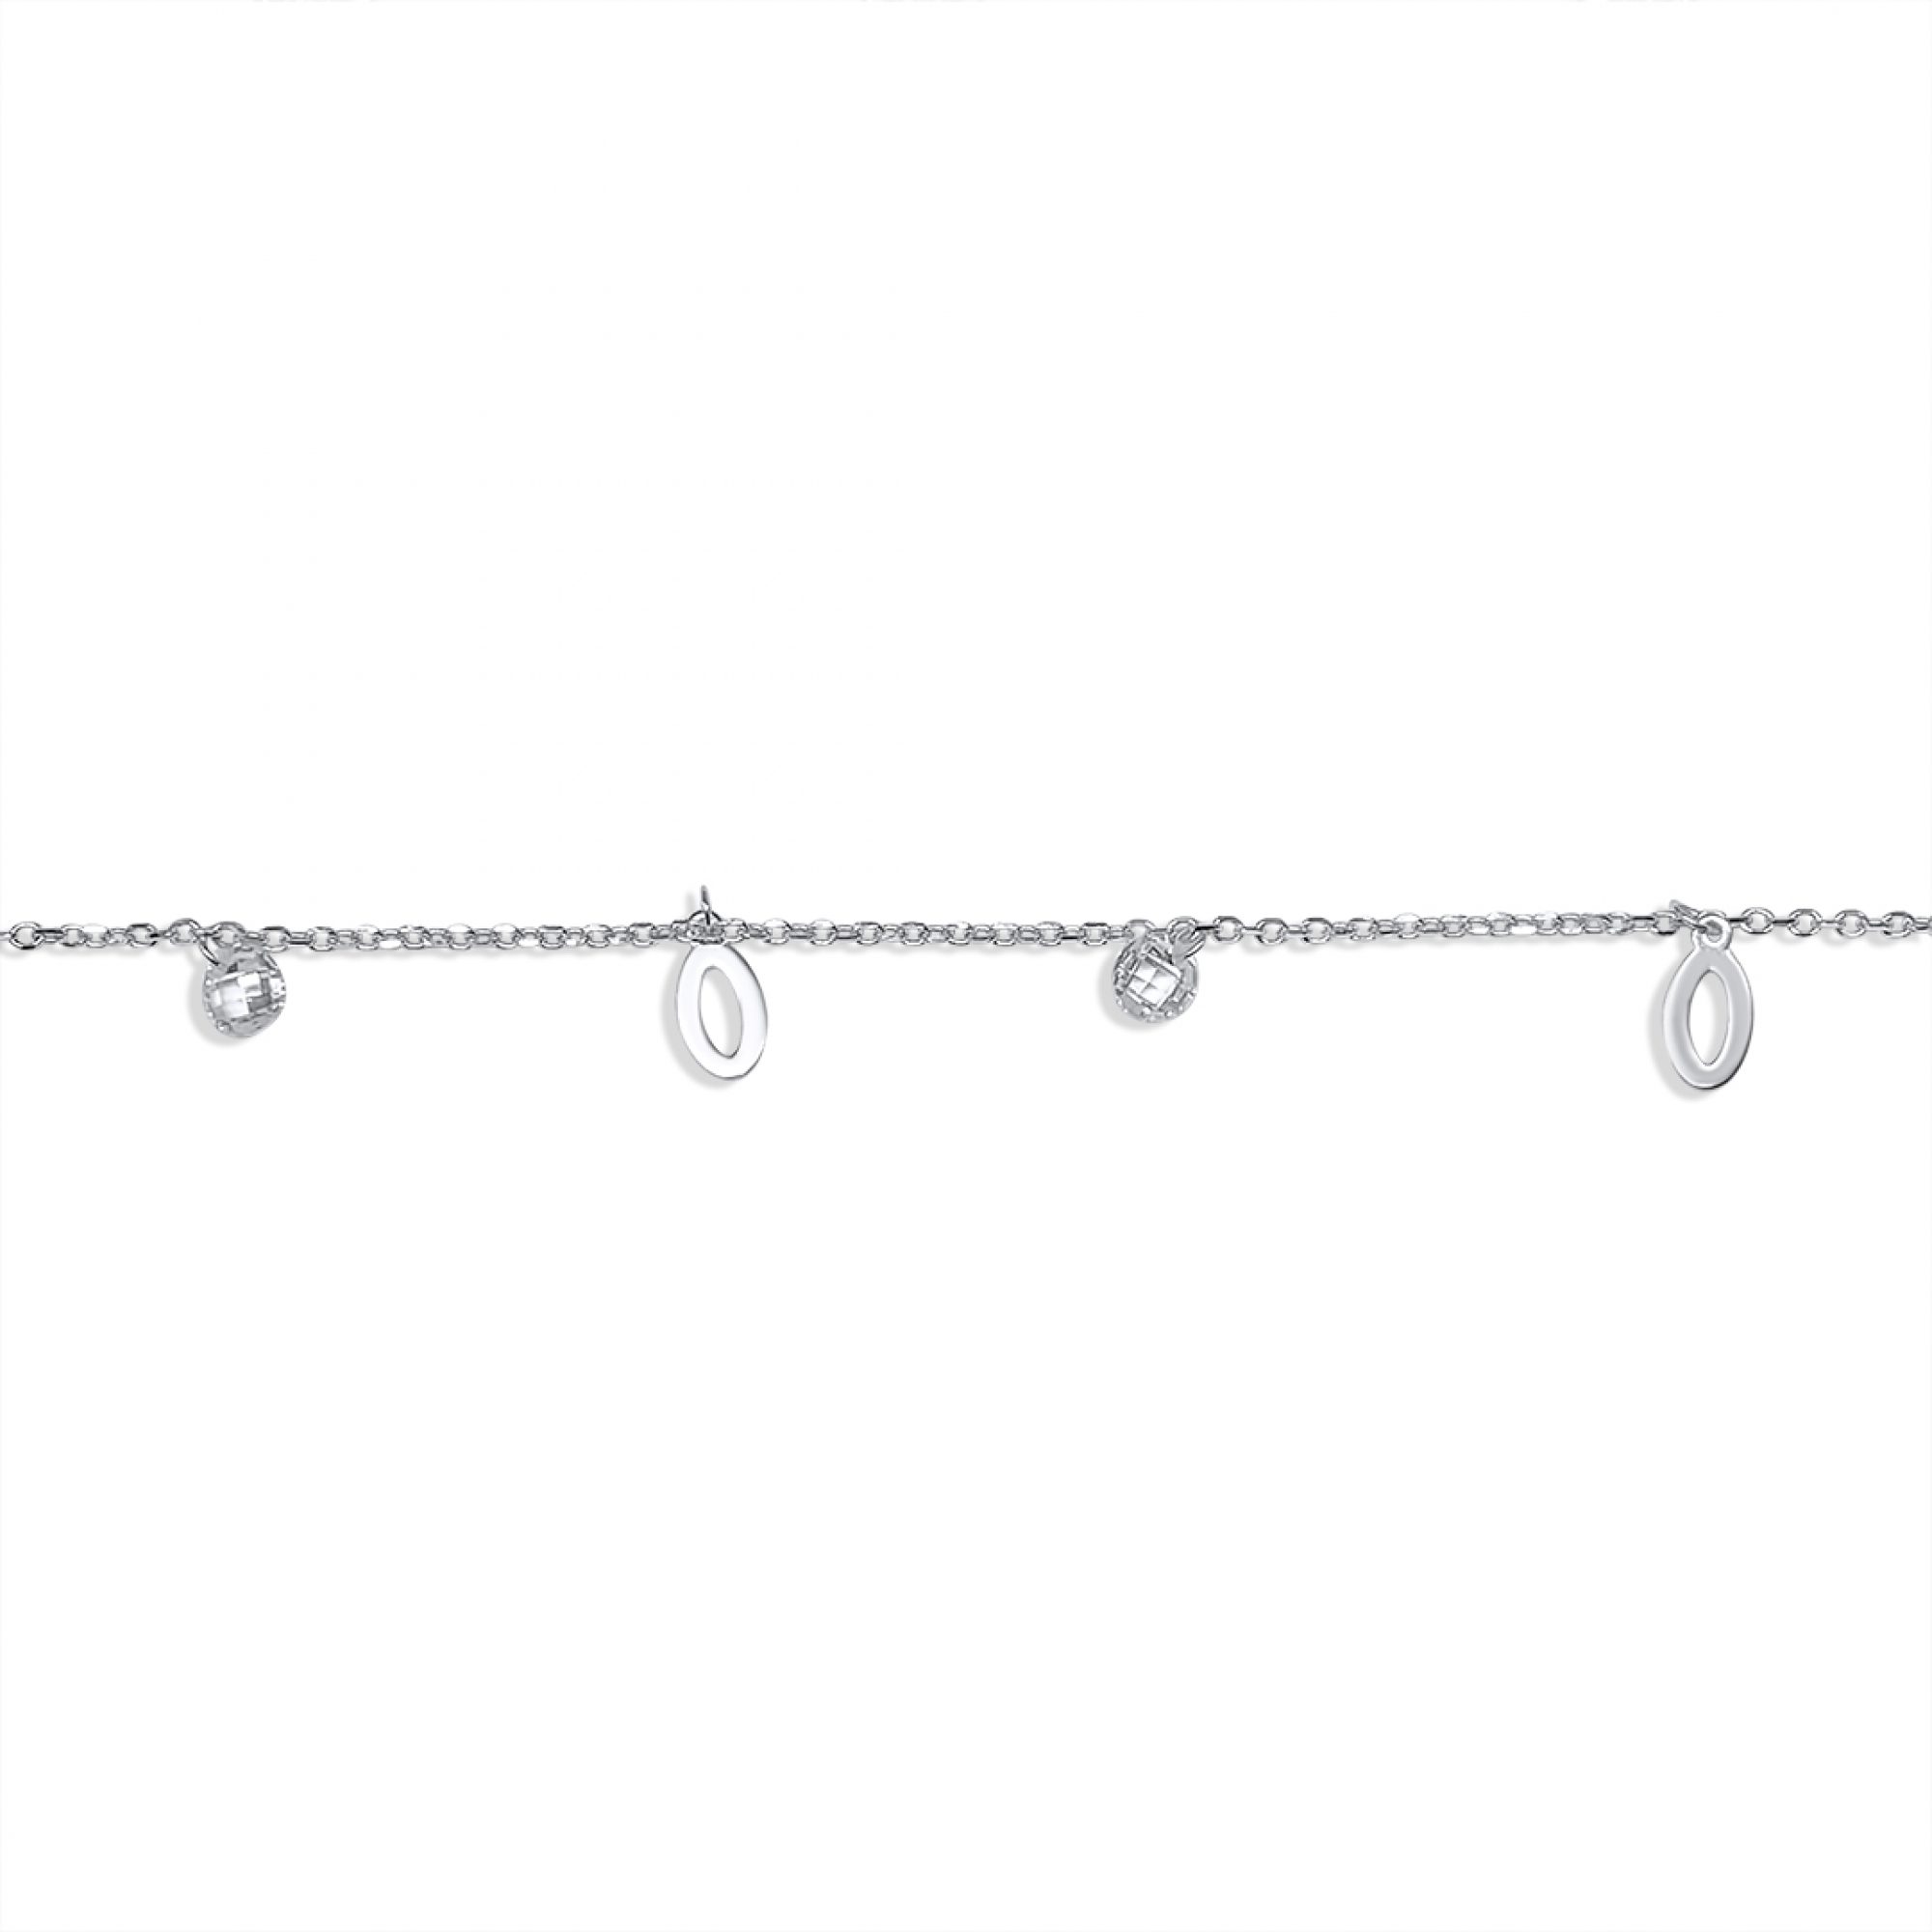 Anklet with dangles